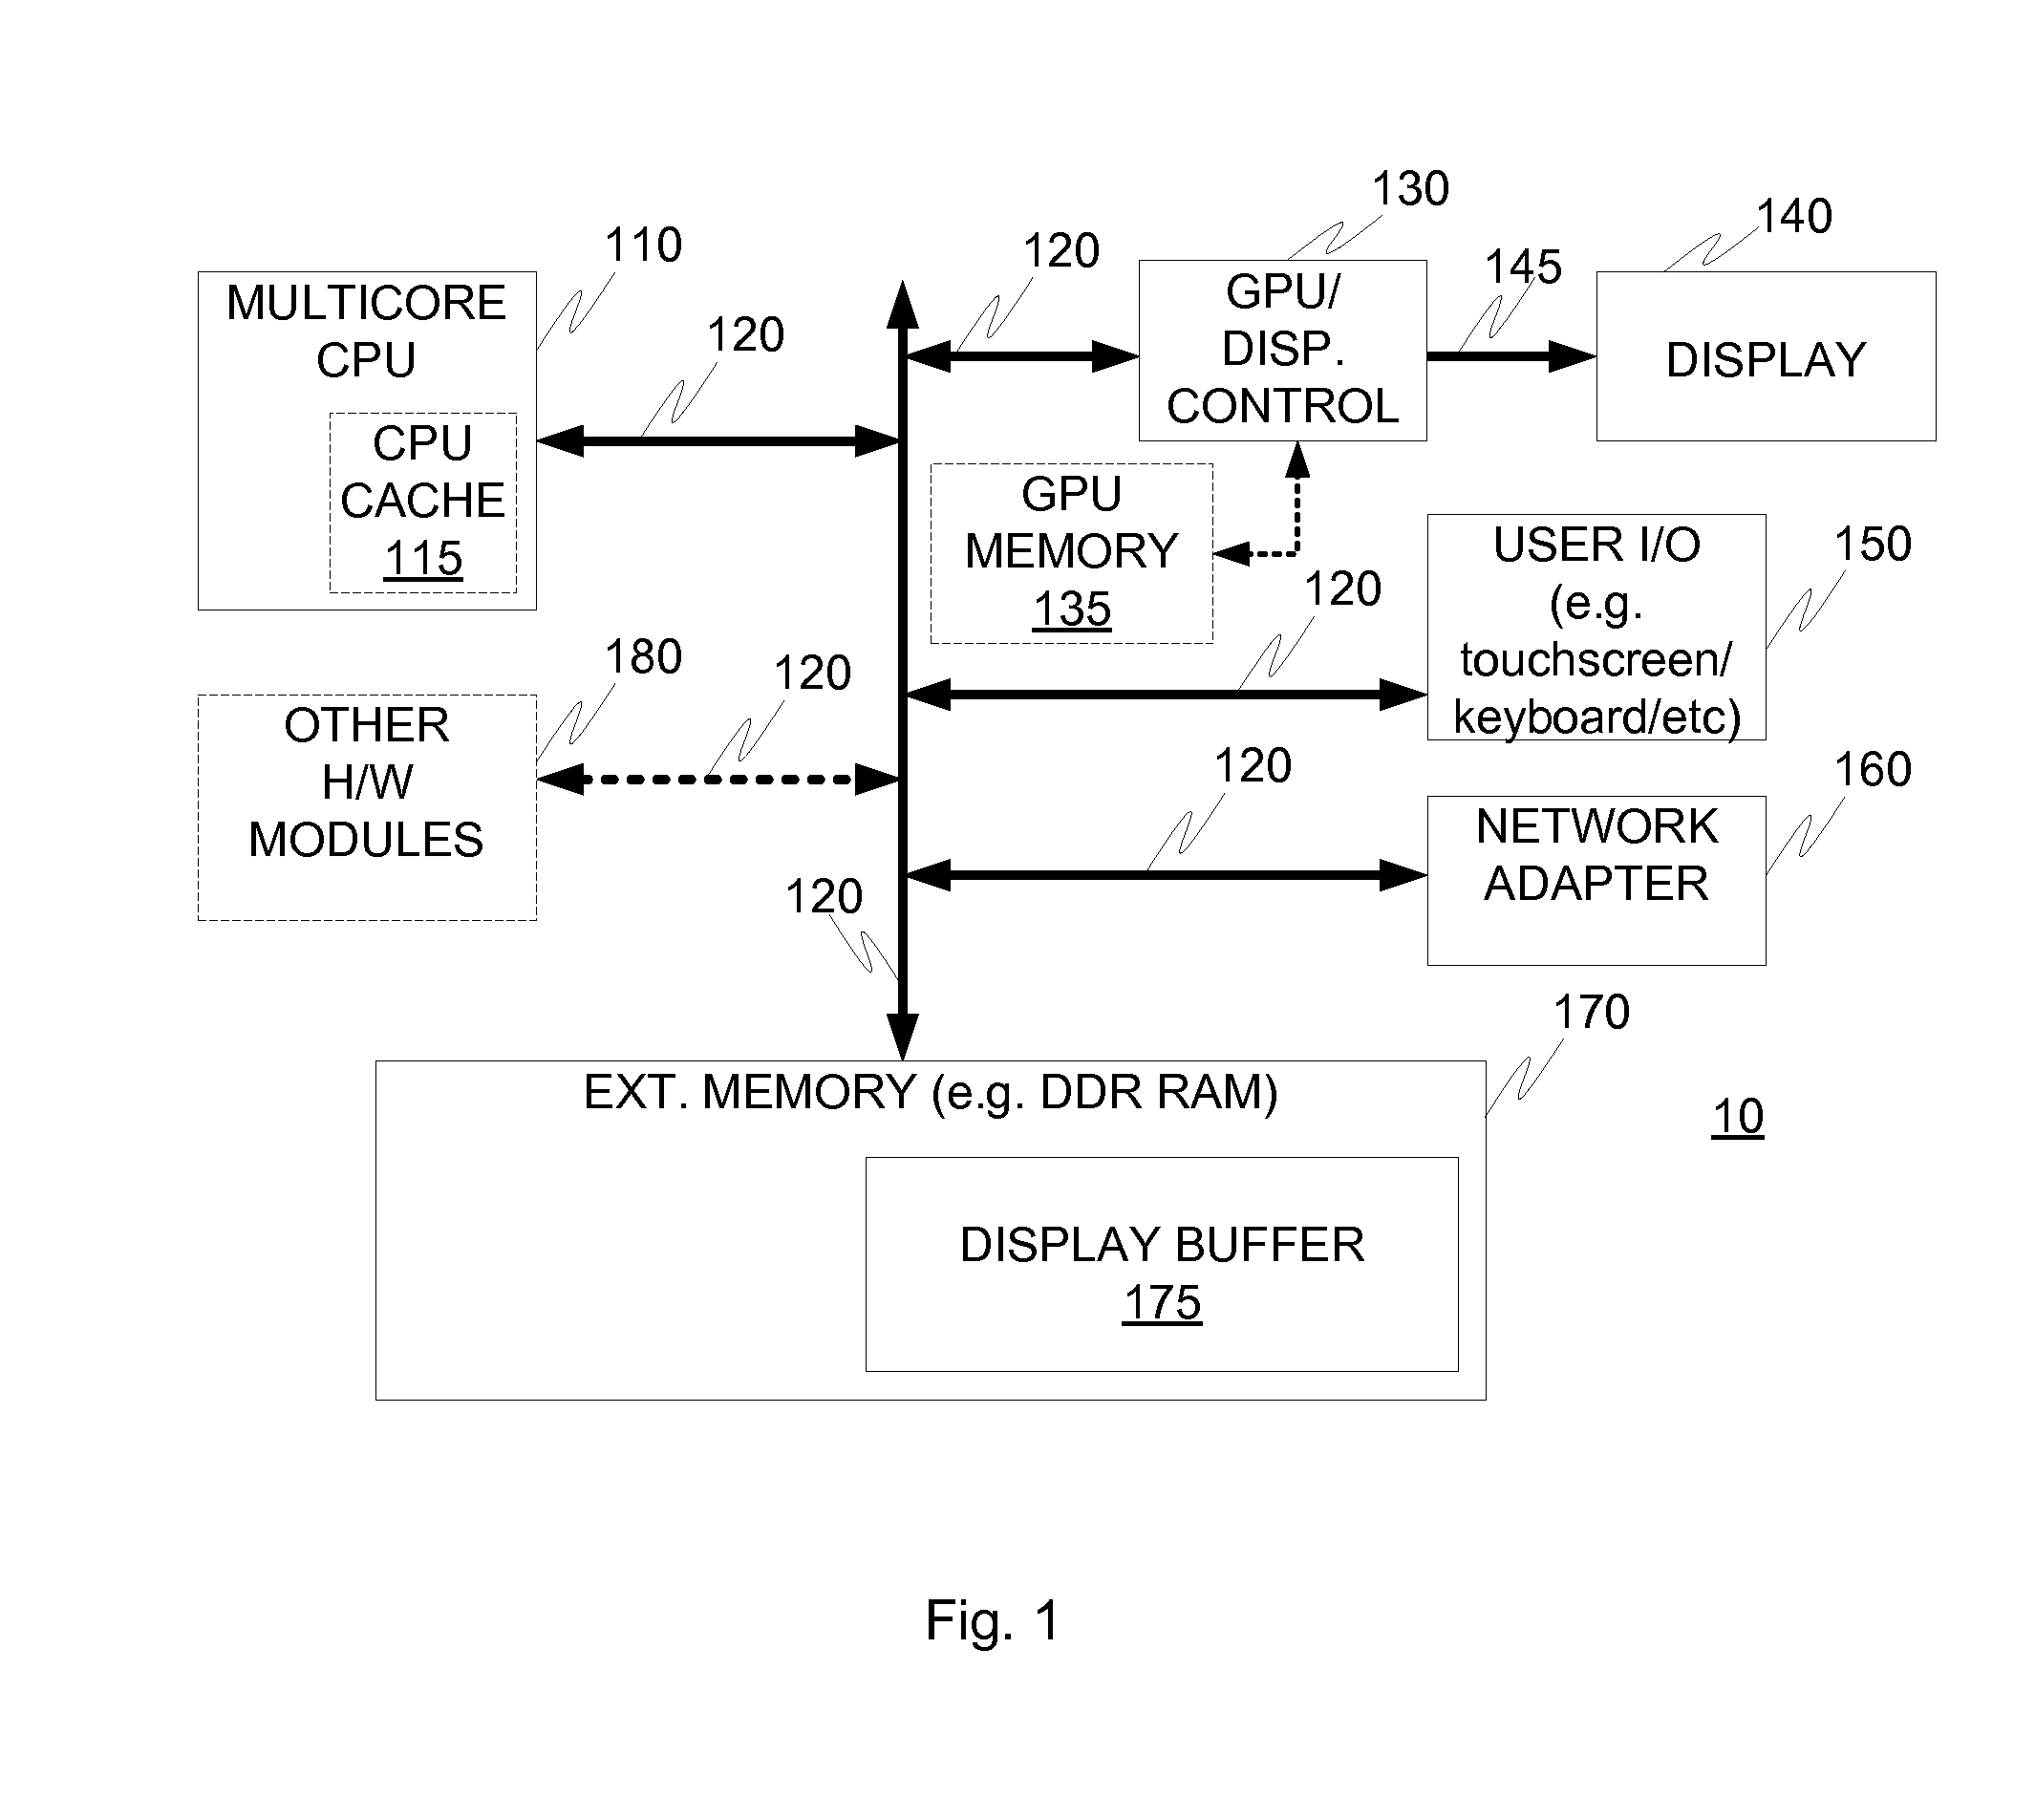 A method and apparatus for using a CPU cache memory for non-CPU related tasks